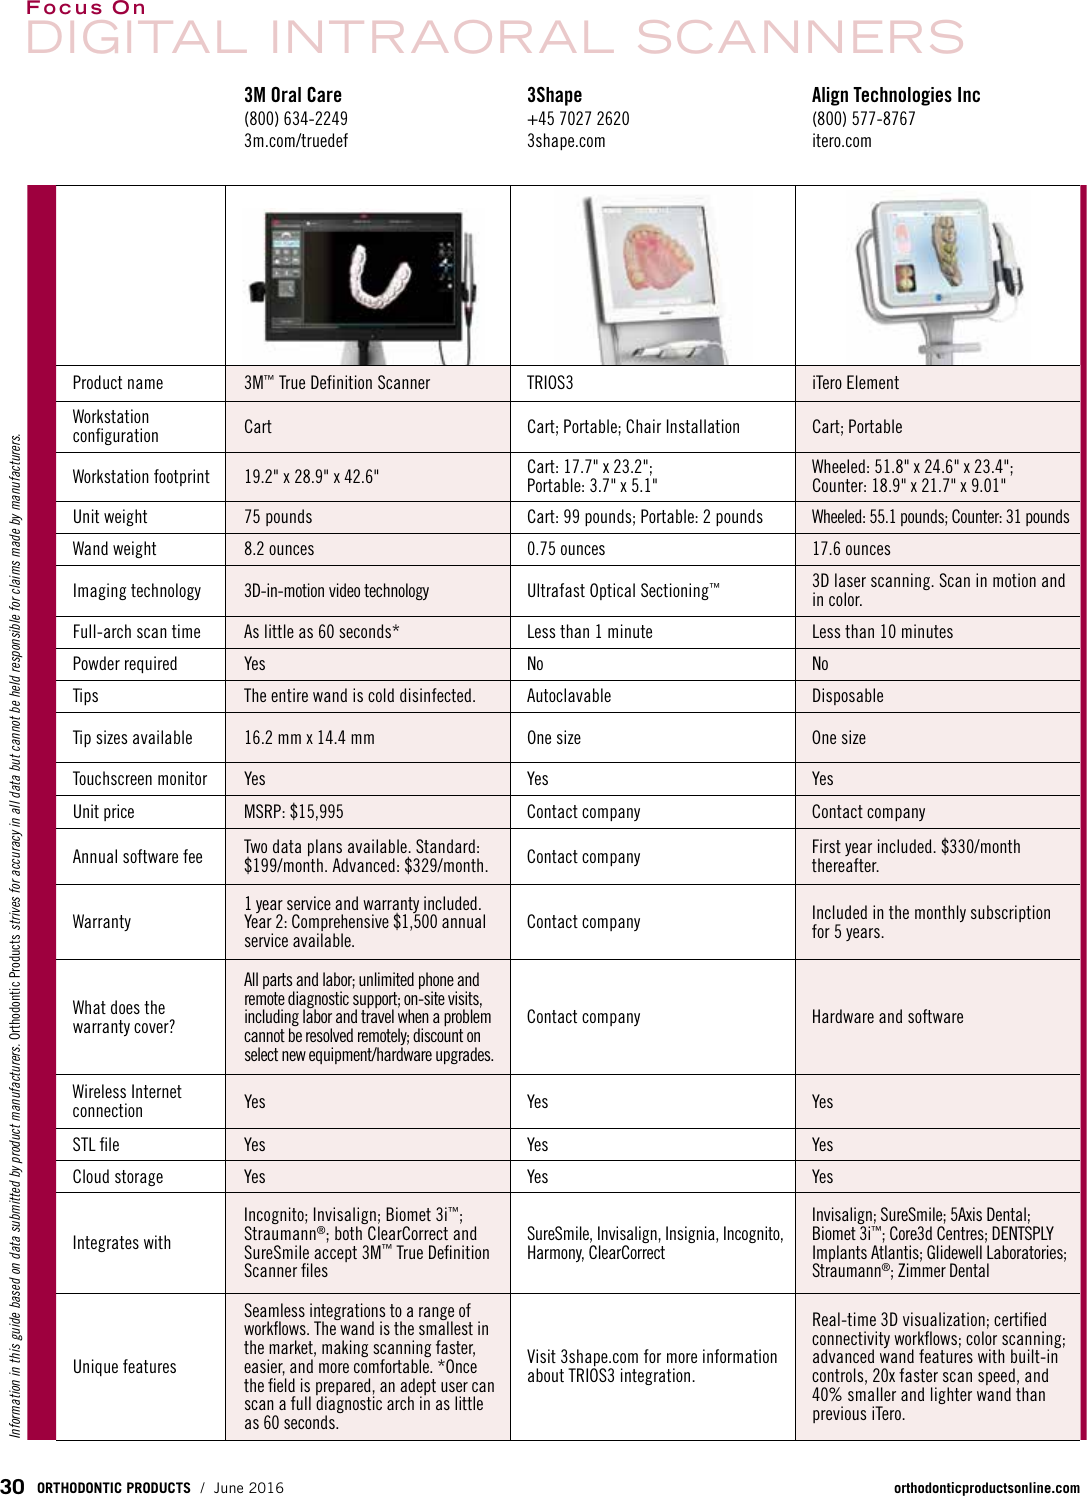 Page 1 of 2 - 2016 Focus Intraoral Scanners